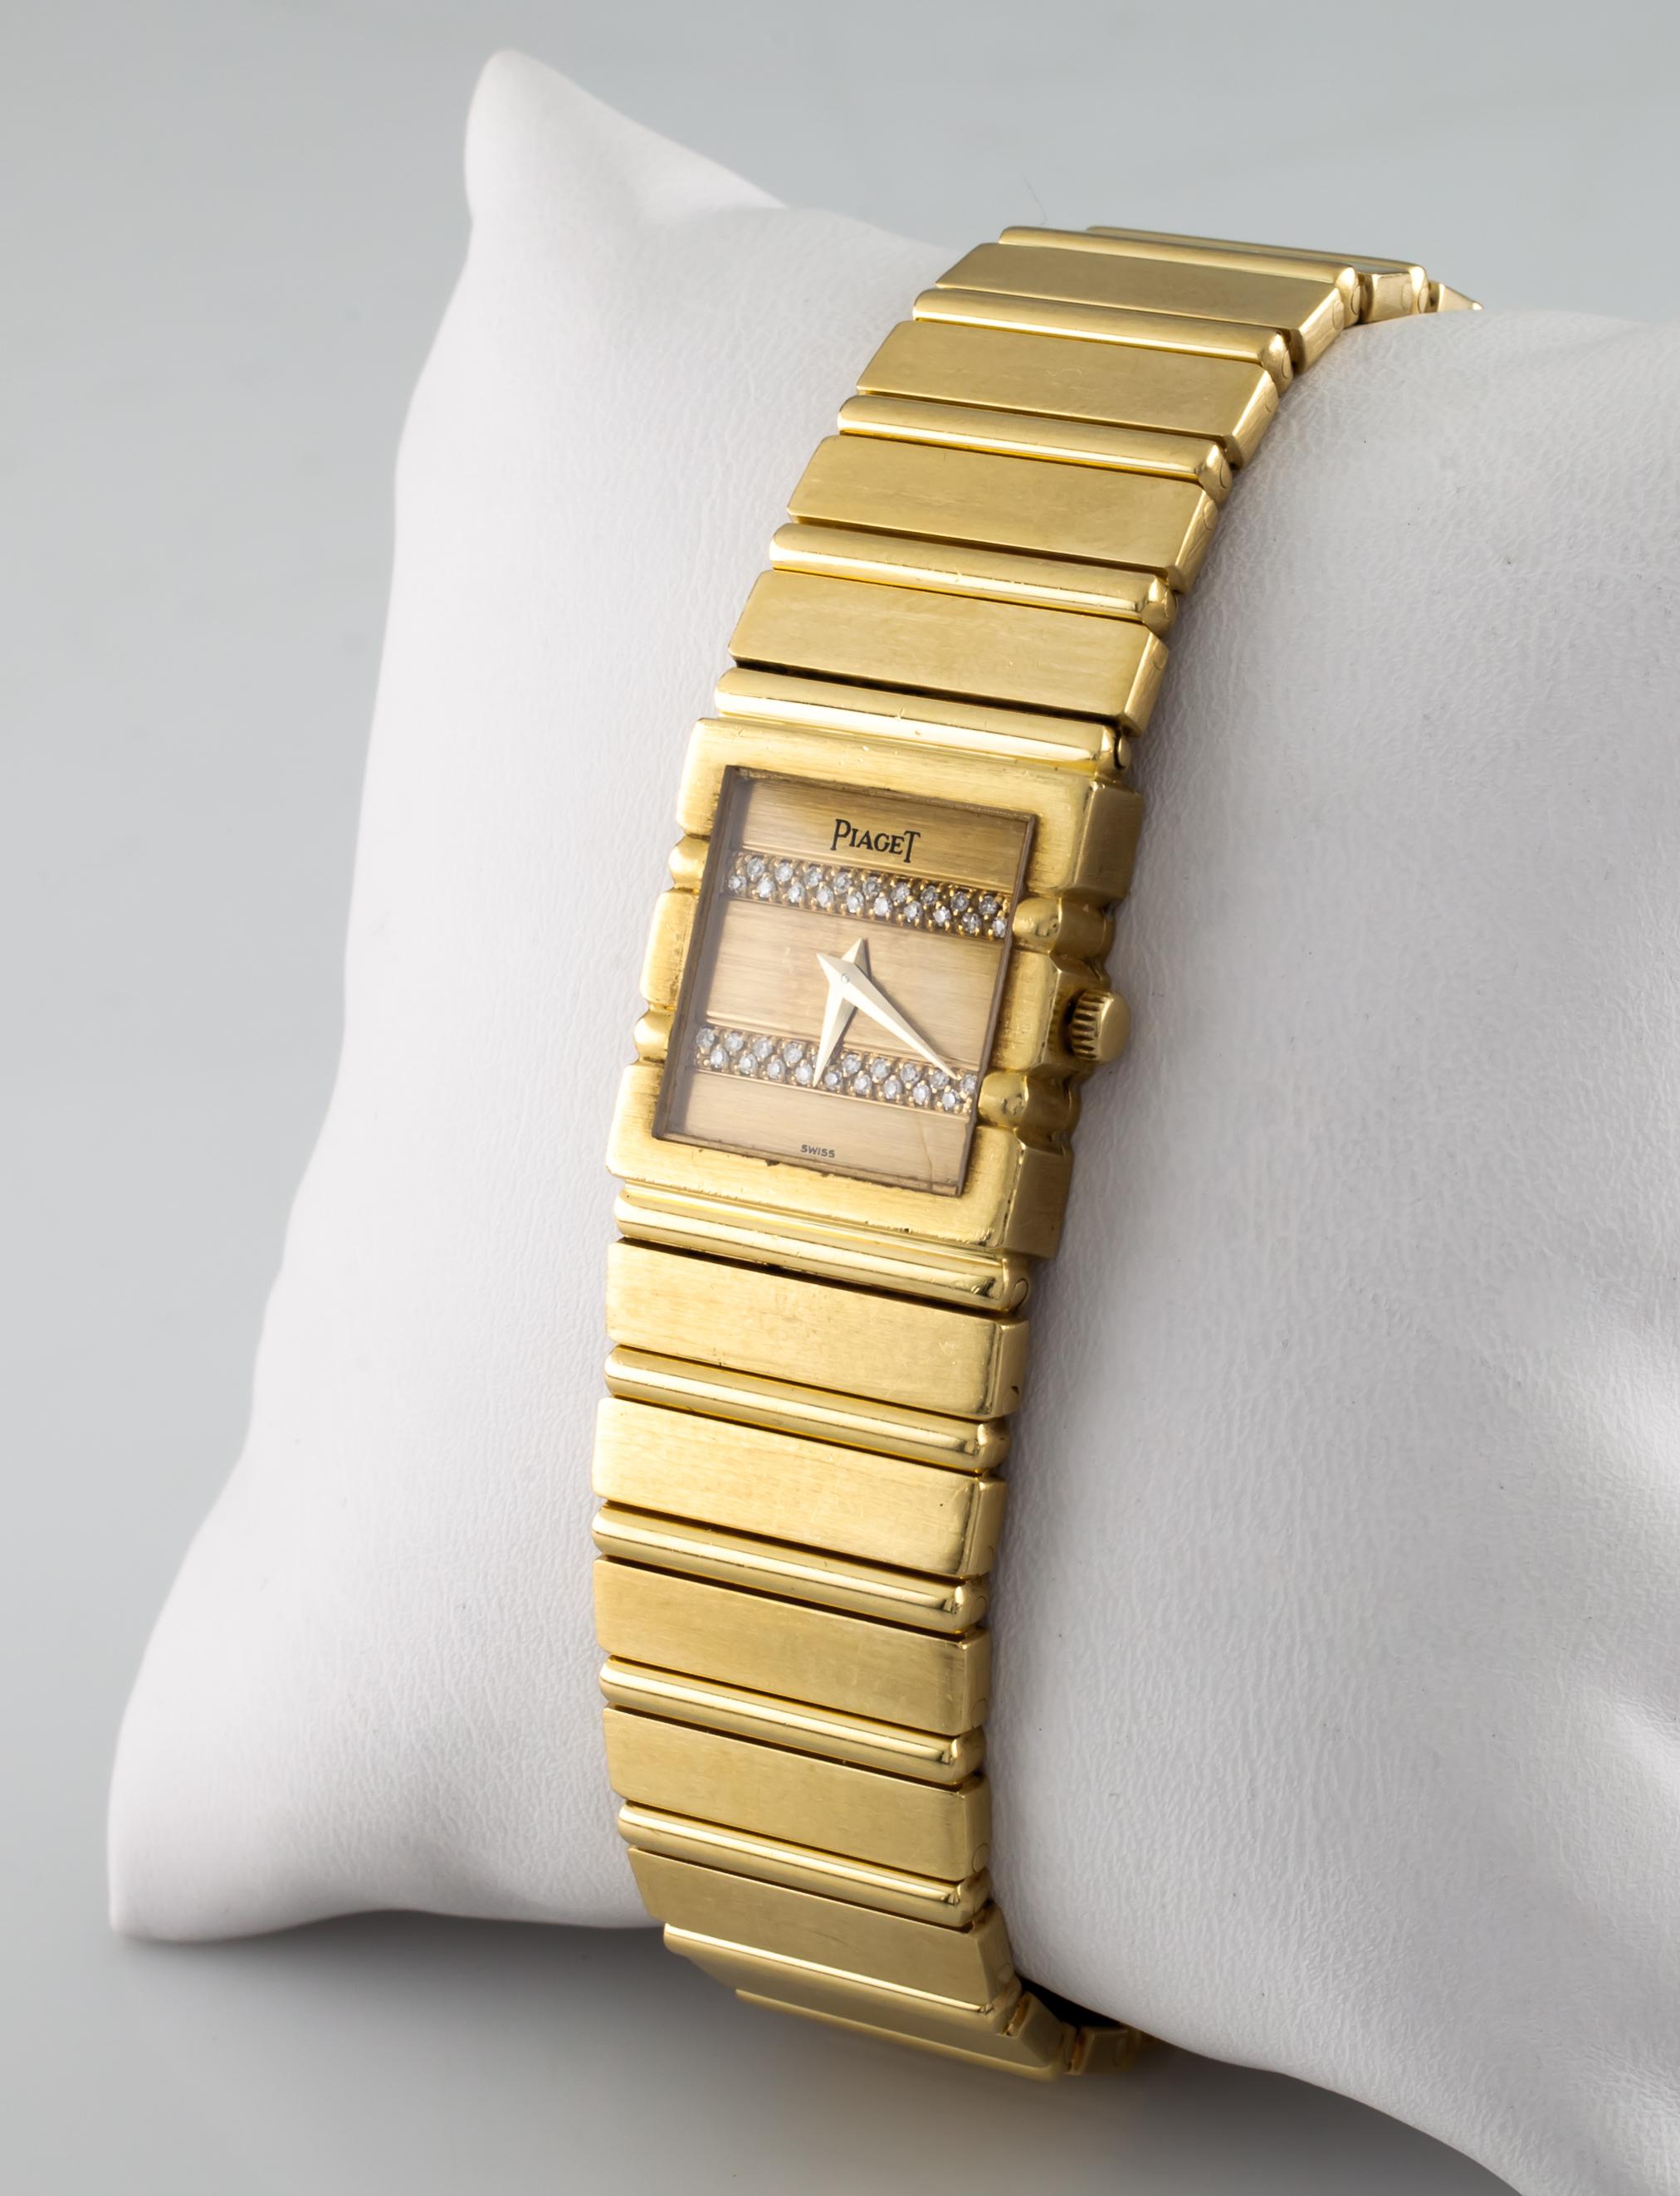 Case #8131C.701-458116
18k Yellow Gold Case
19 mm Wide 
20 mm Long
Lug-to-Lug Distance = 20 mm
Thickness = 5 mm
Gold Dial with Two Strips of Pavé Set Diamonds
Labeled 